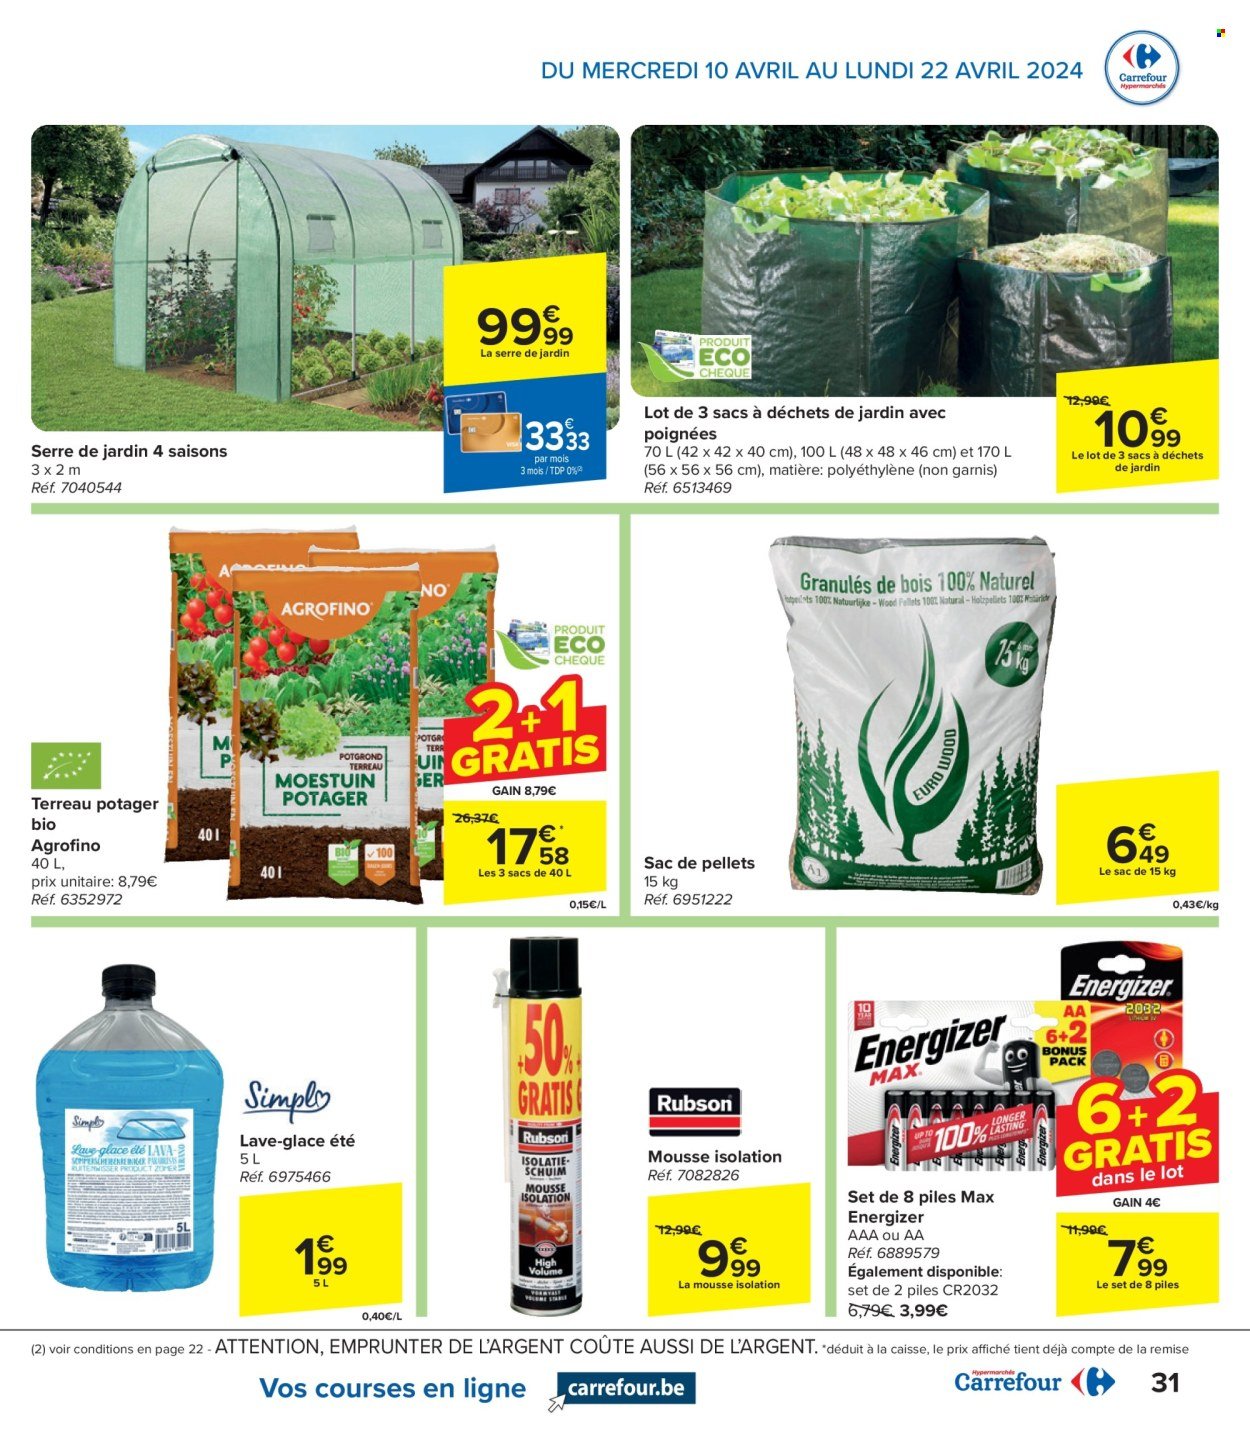 Catalogue Carrefour hypermarkt - 10.4.2024 - 22.4.2024. Page 31.